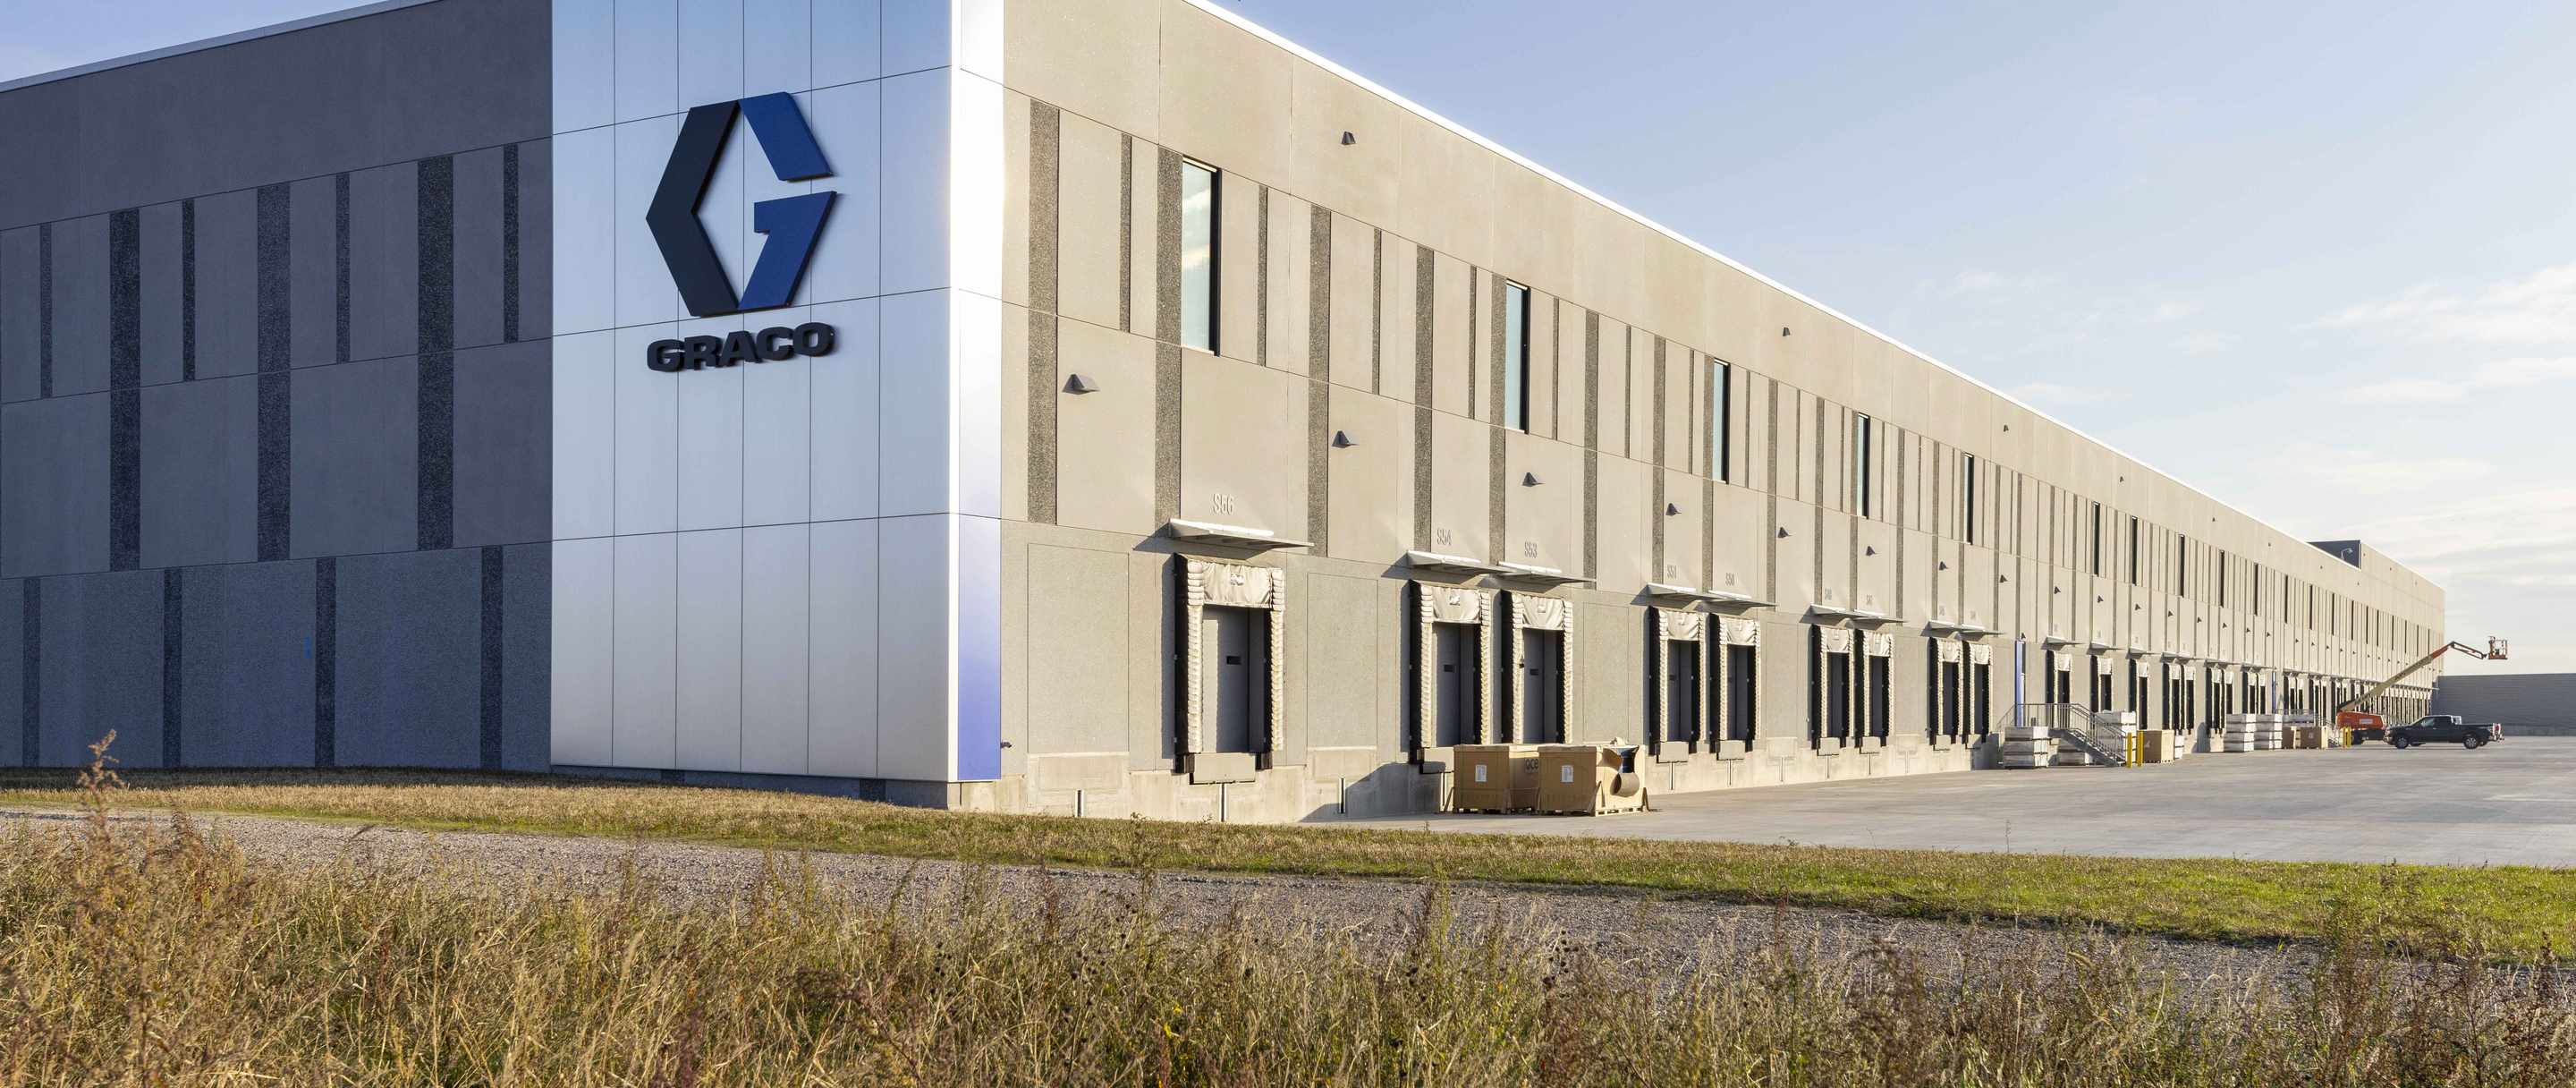 graco distribution center exterior with wall panels